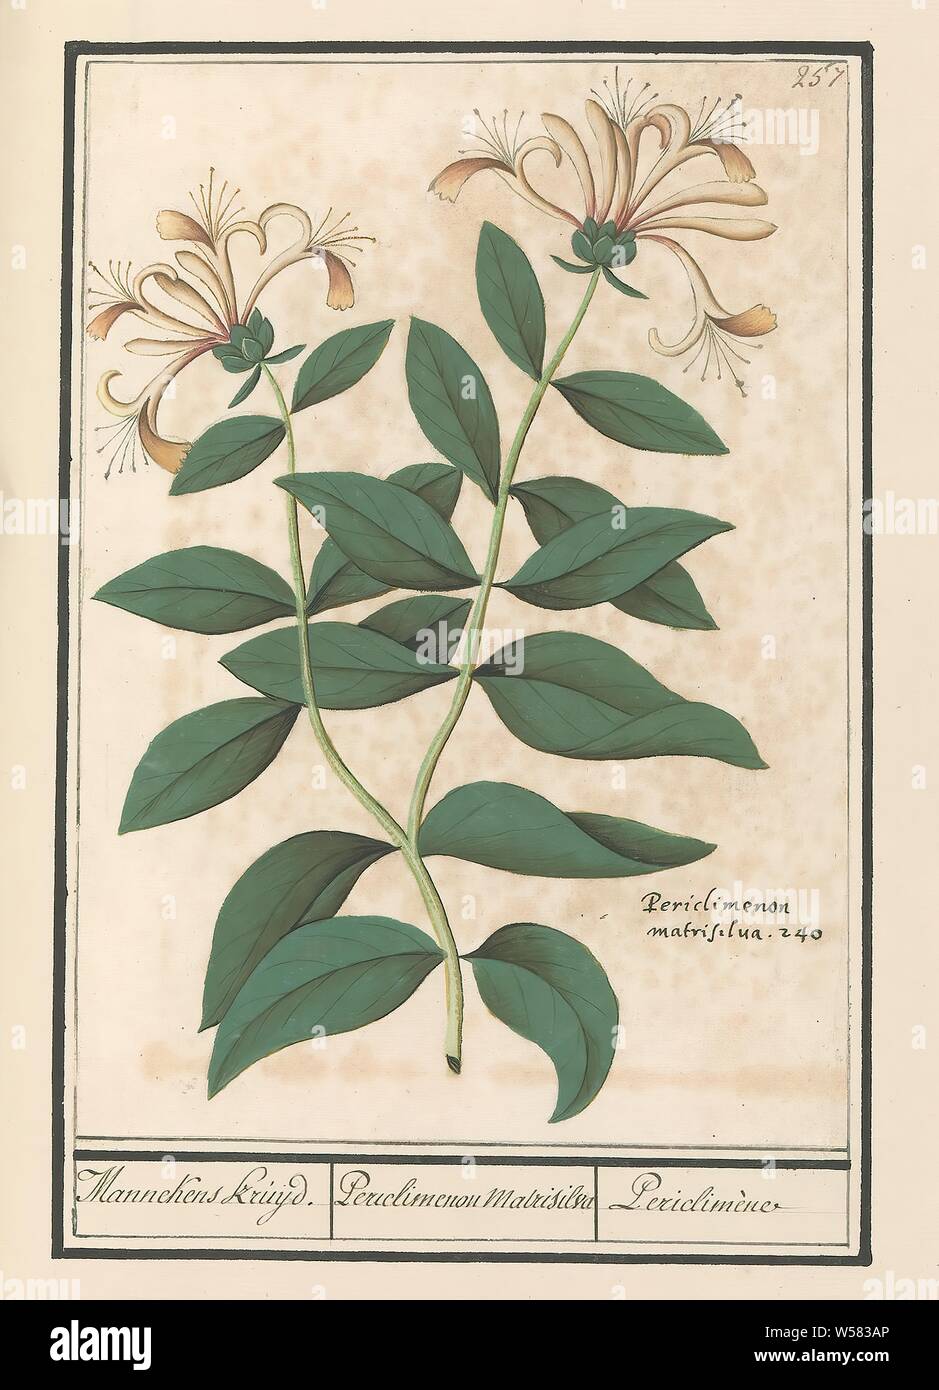 Garden honeysuckle or ordinary honeysuckle (Lonicera caprifolium) Mannekens Kruijd. / Periclimenon Matrisilva / Periclimène (title on object), Honeysuckle. Numbered top right: 257. Below the Latin name. Part of the third album with drawings of flowers and plants. Tenth of twelve albums with drawings of animals, birds and plants known around 1600, commissioned by Emperor Rudolf II. With explanations in Dutch, Latin and French., Flowers (with NAME), Anselmus Boetius de Boodt, 1596 - 1610, paper, watercolor (paint), deck paint, chalk, ink, pen, h 242 mm × w 172 mm Stock Photo